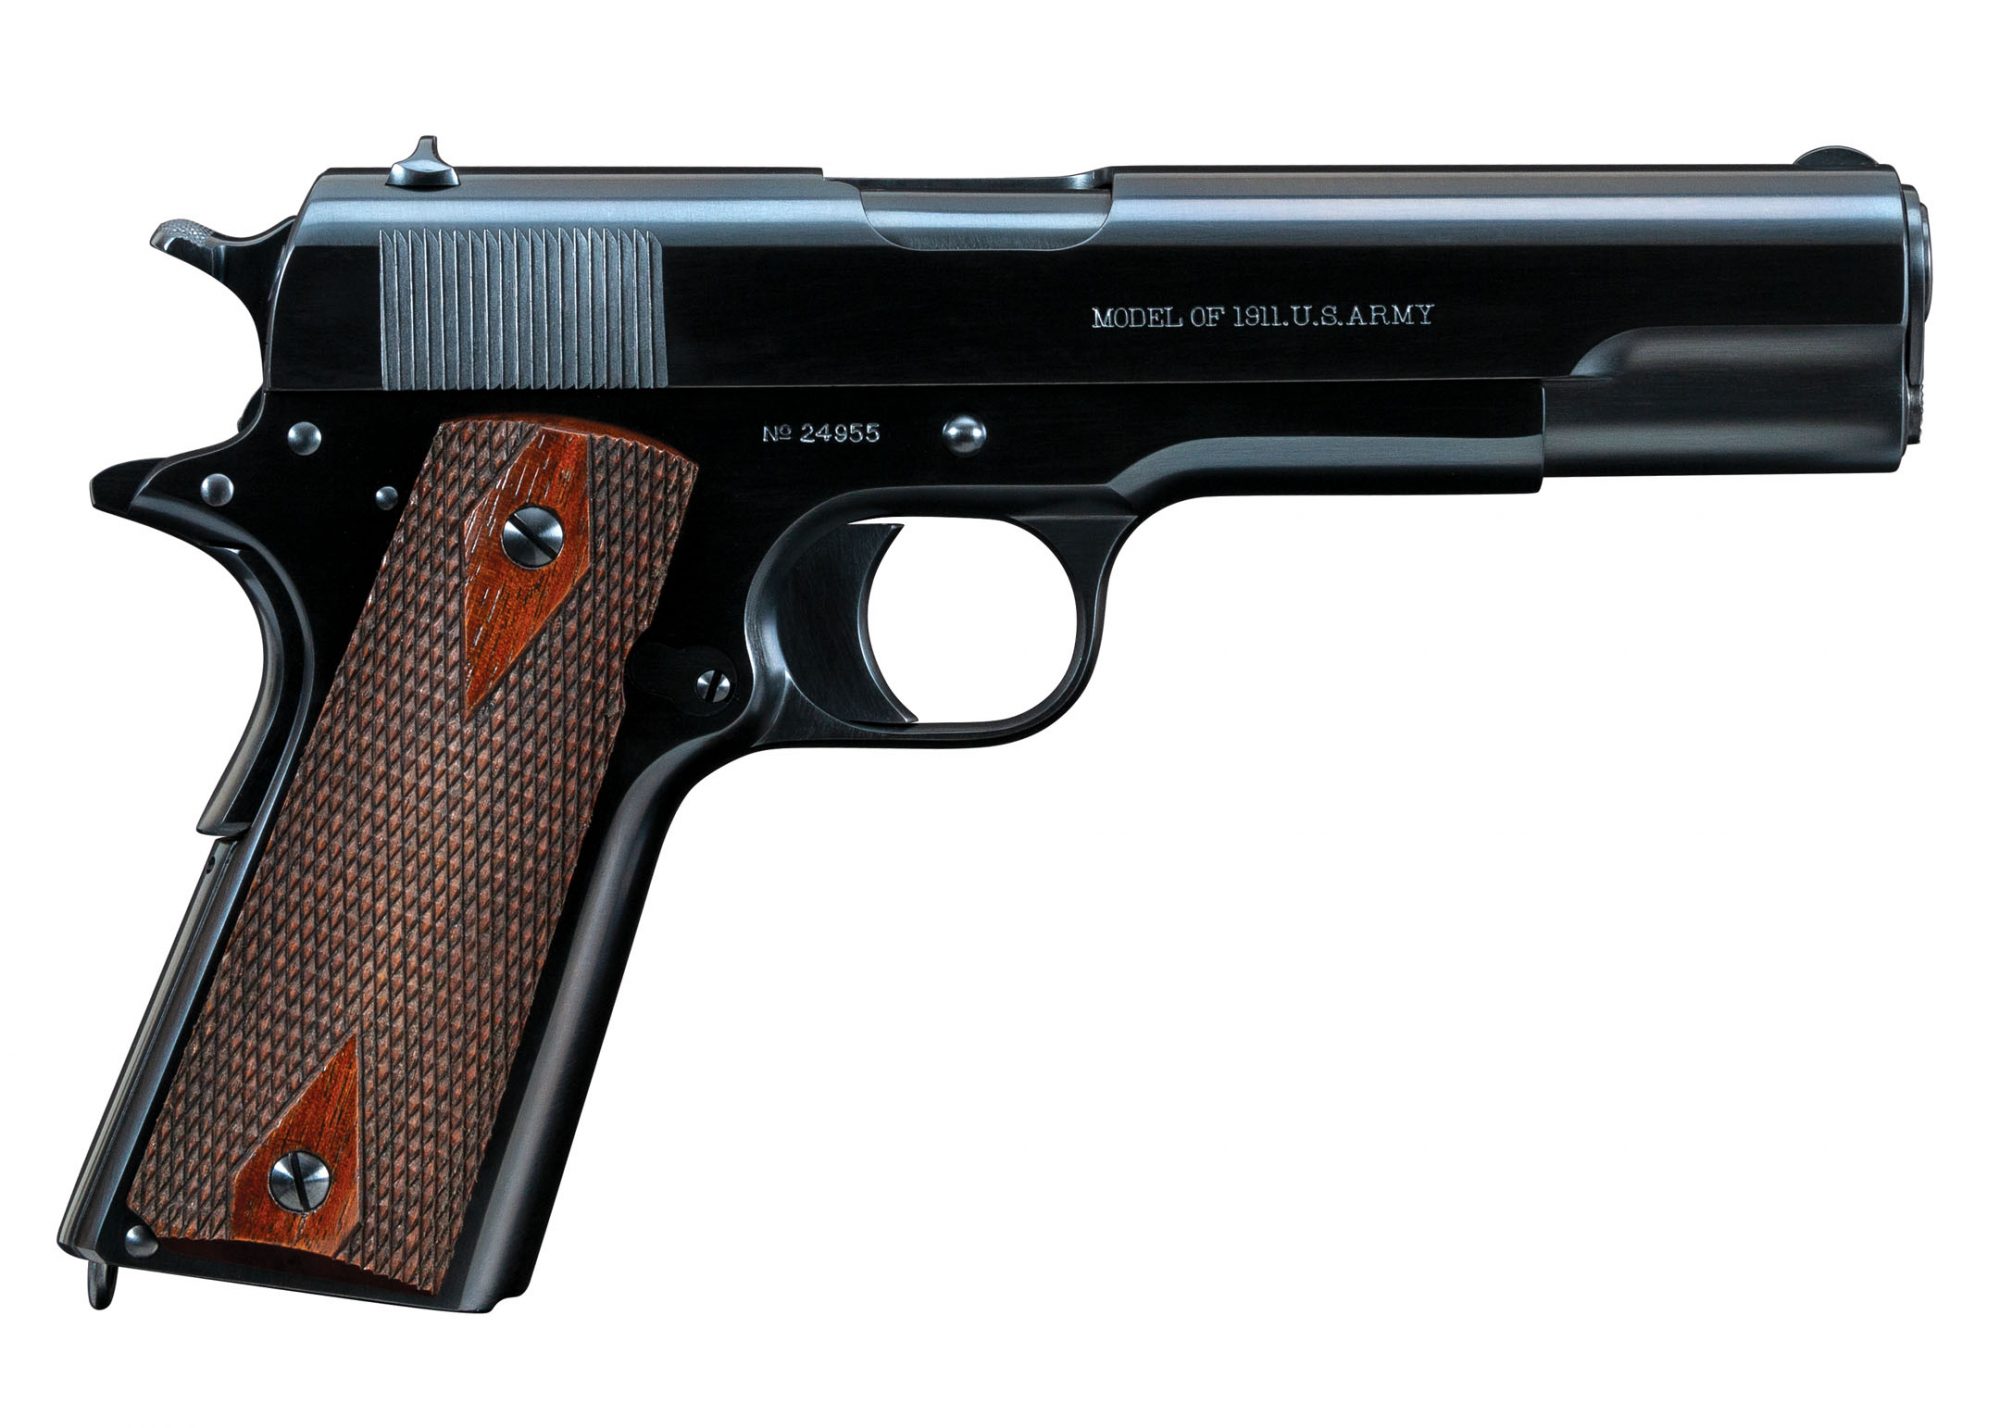 Photo of a Colt Model 1911 U.S. Army from 1913, after restoration services performed by Turnbull Restoration of Bloomfield, NY